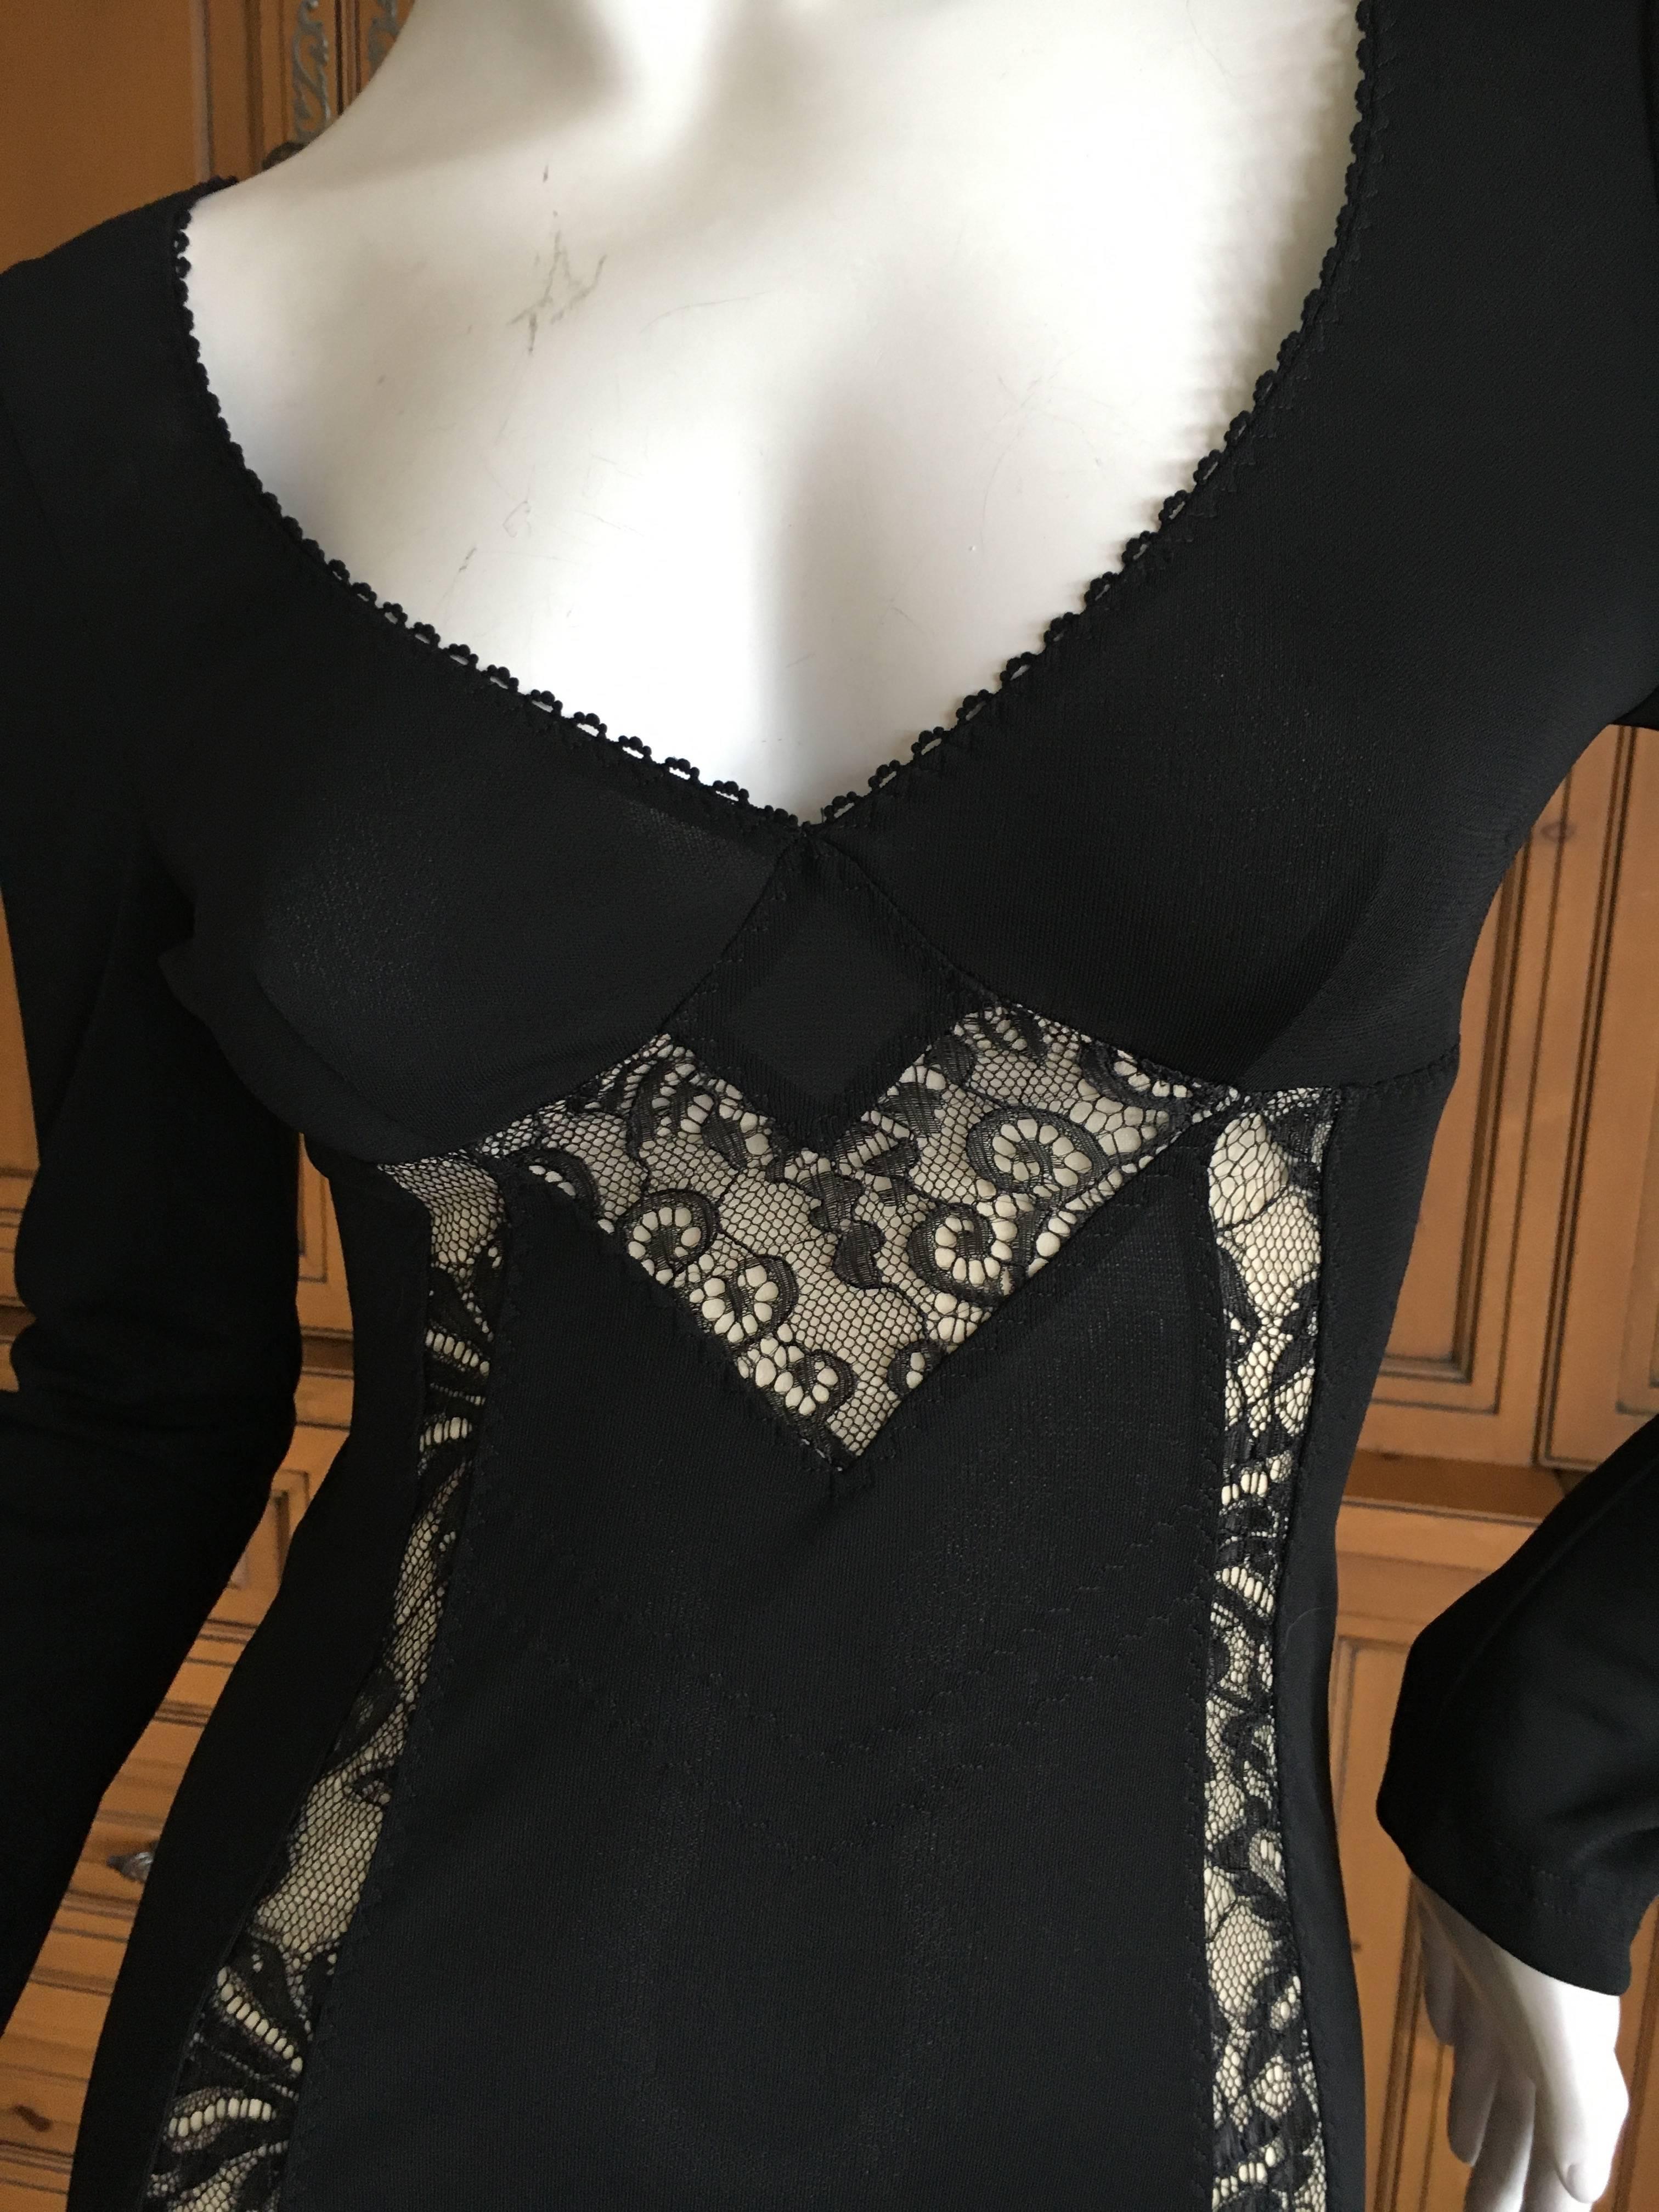 Women's D&G Dolce & Gabbana Vintage Little Black Dress with Sheer Lace Inserts